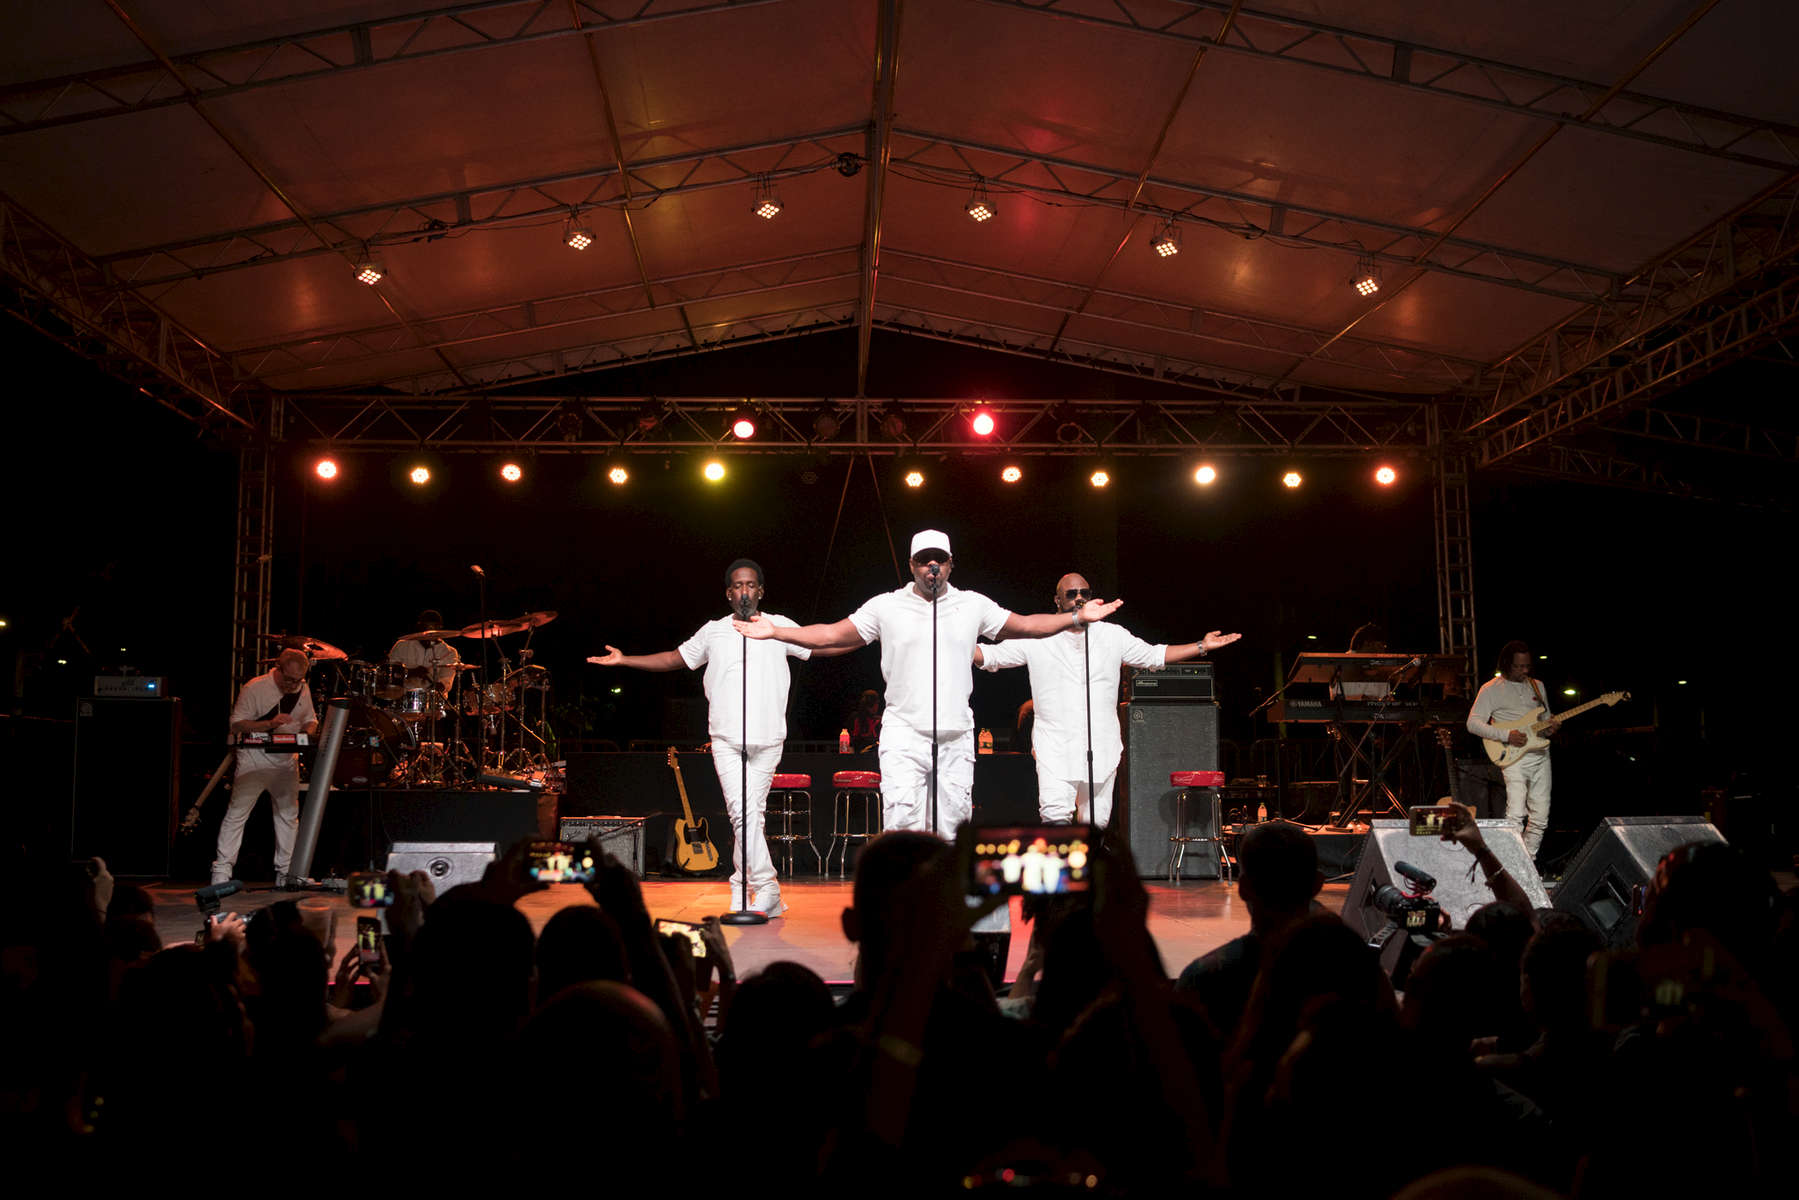 With an audience of over 3000 cheering fans, the Boyz II Men did not disappoint, while performing their classic hits during a show at the Paseo Stadium in Hagatna, Guam. (Dec. 15, 2017)Photo by Nancy Borowick